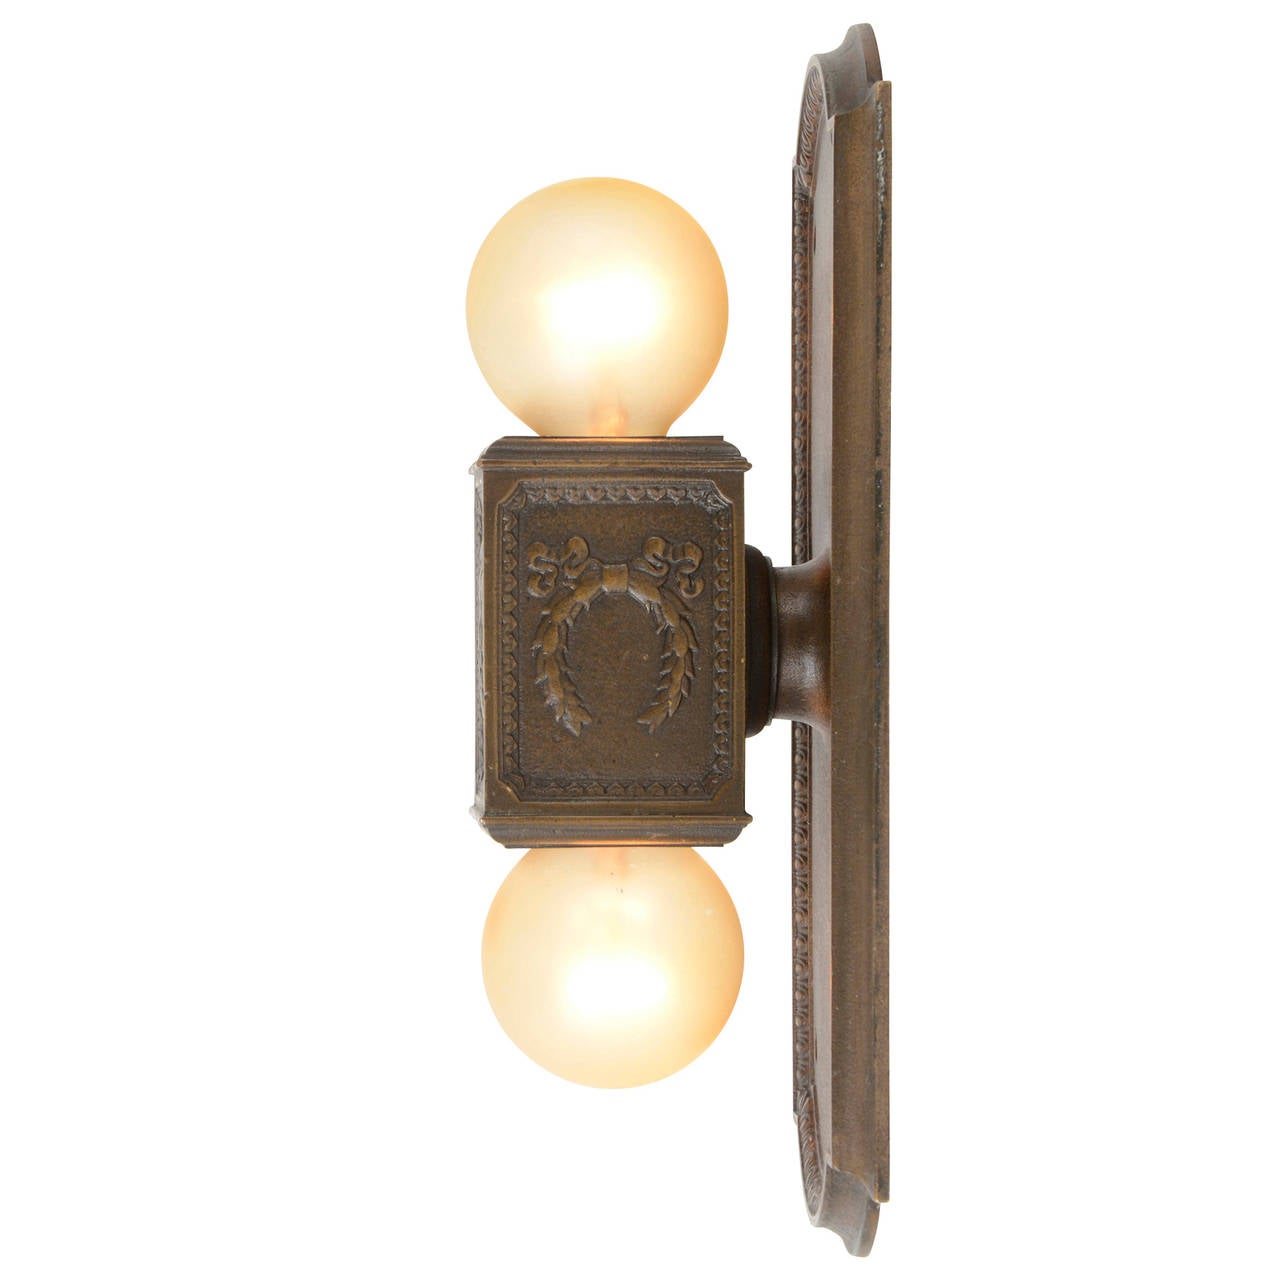 This impressive cast bronze sconce has a foot firmly planted in two different camps. One belongs in the world of Classical design, as egg and dart trim, bay leaf patterning and festoons adorn the fixture. The other foot stands proudly in the realm